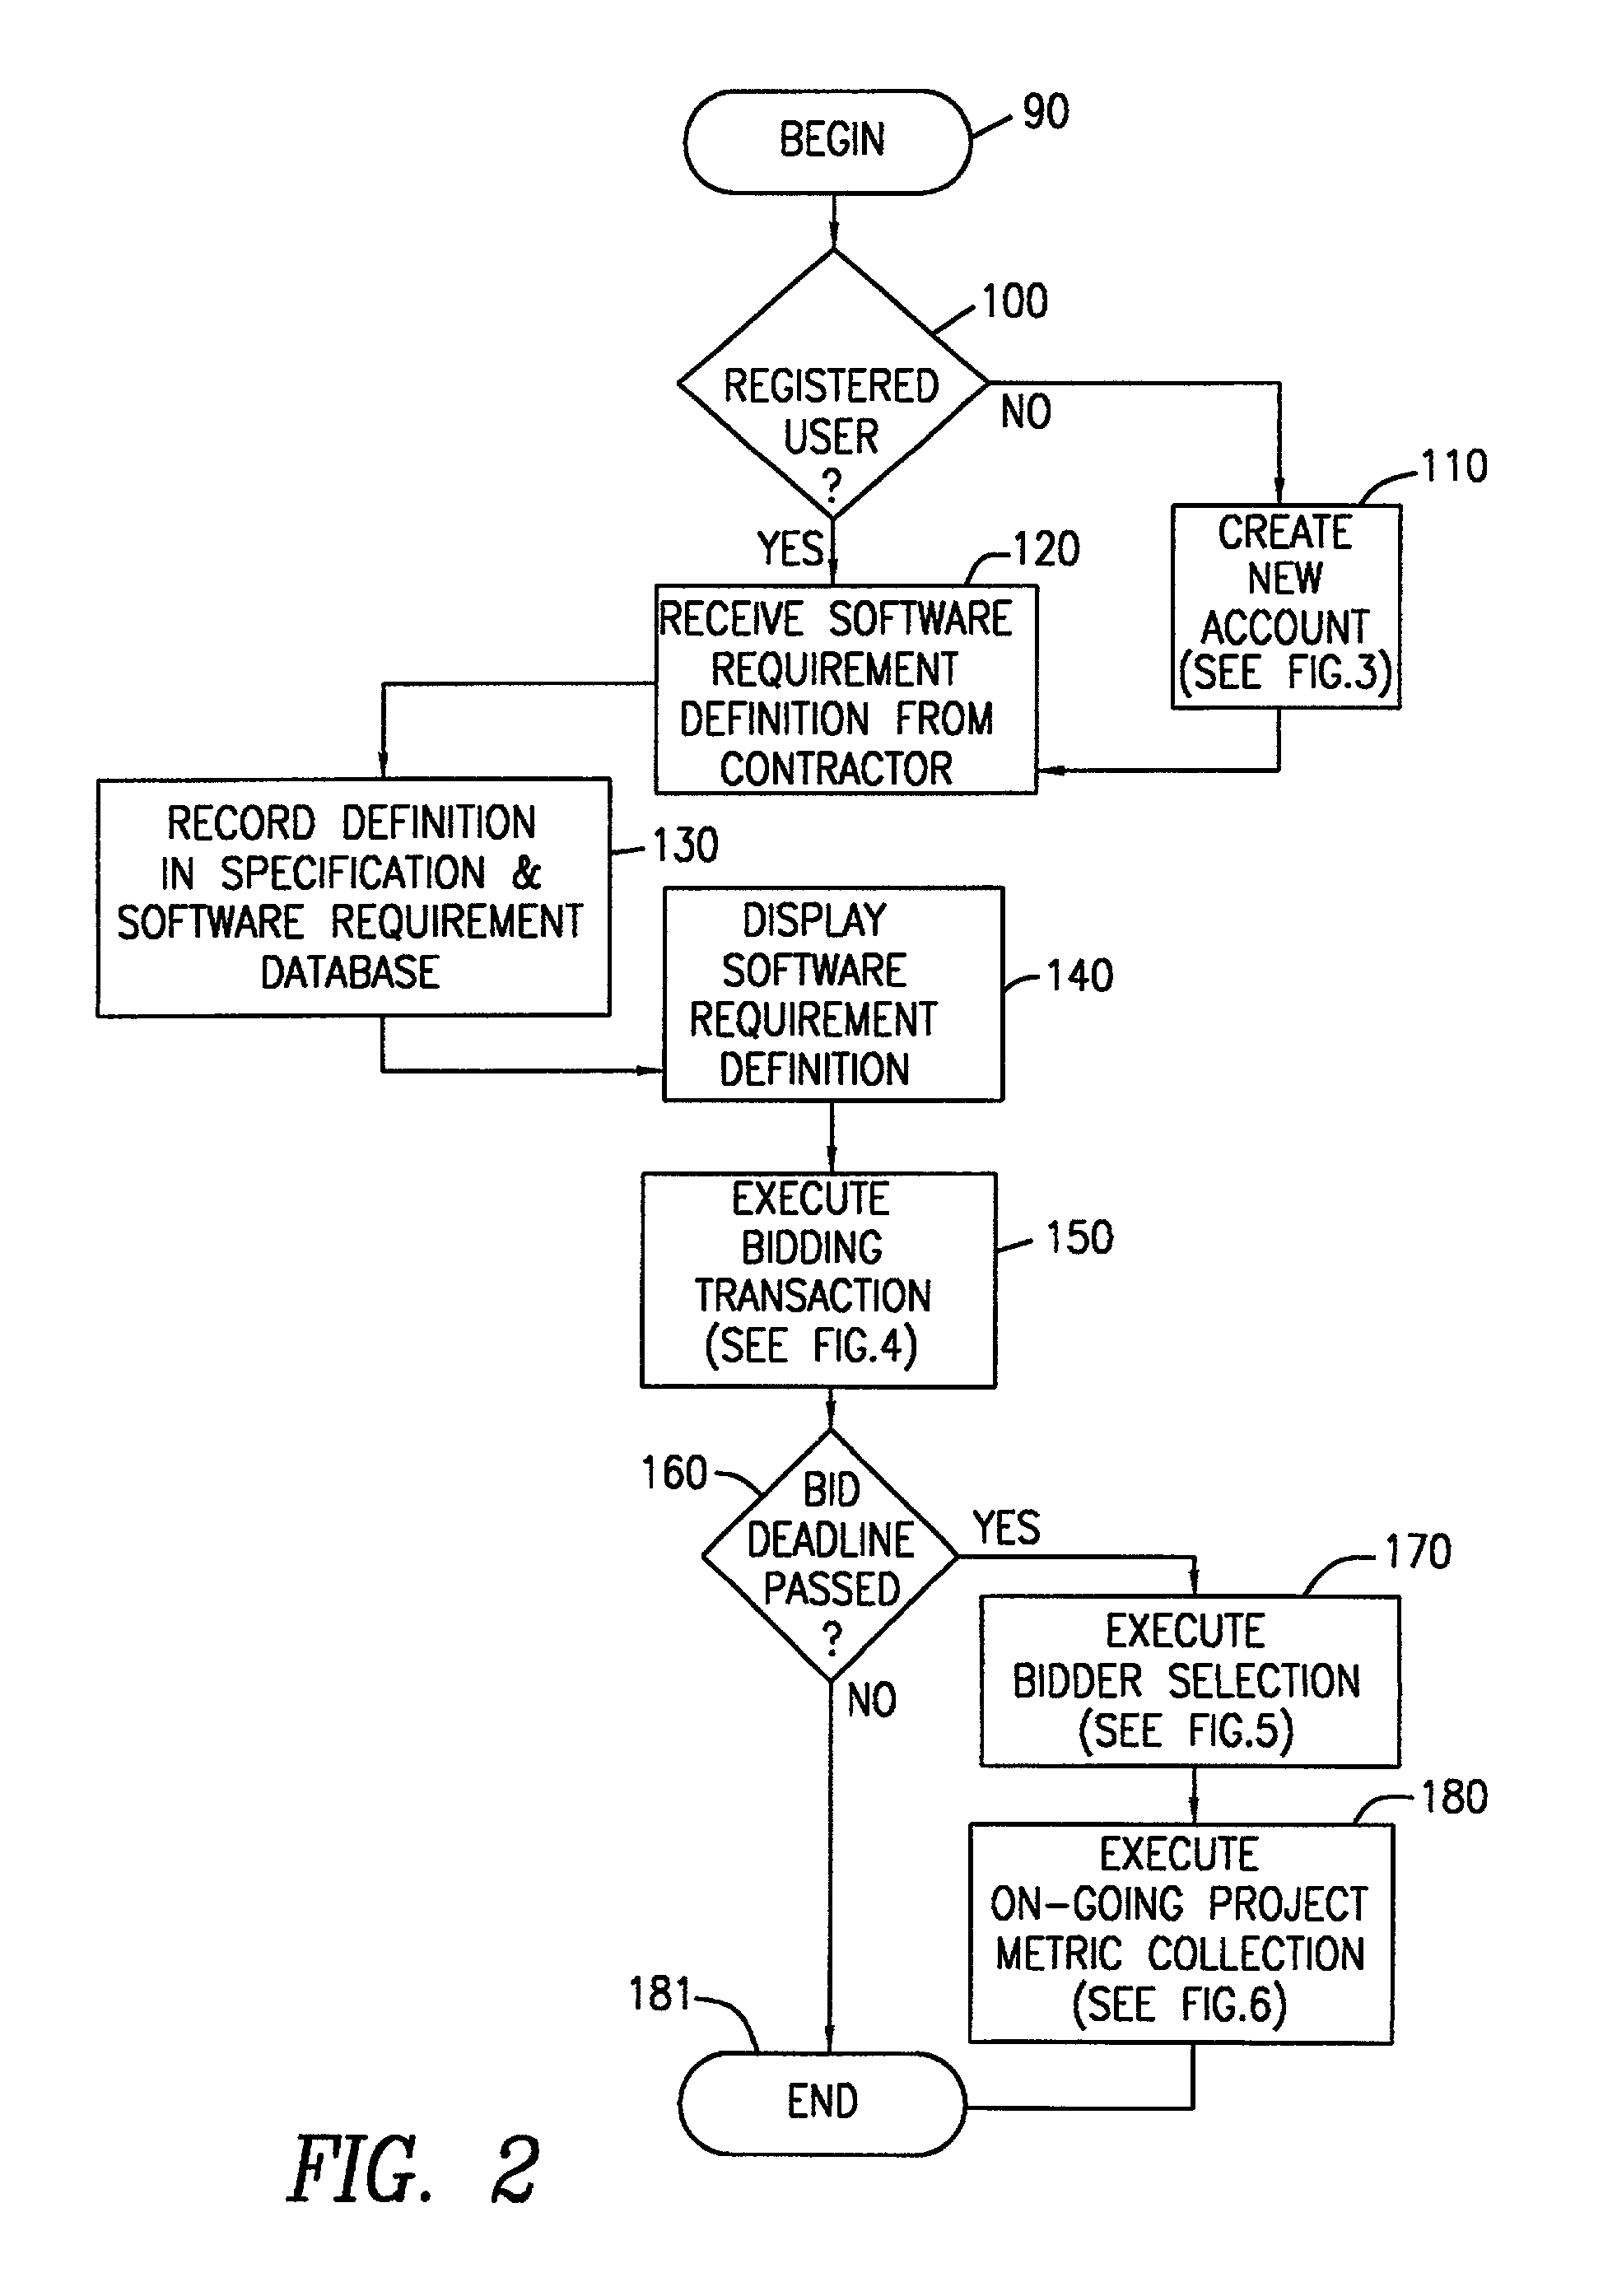 System and method for facilitating bidding transactions and conducting project management utilizing software metric collection